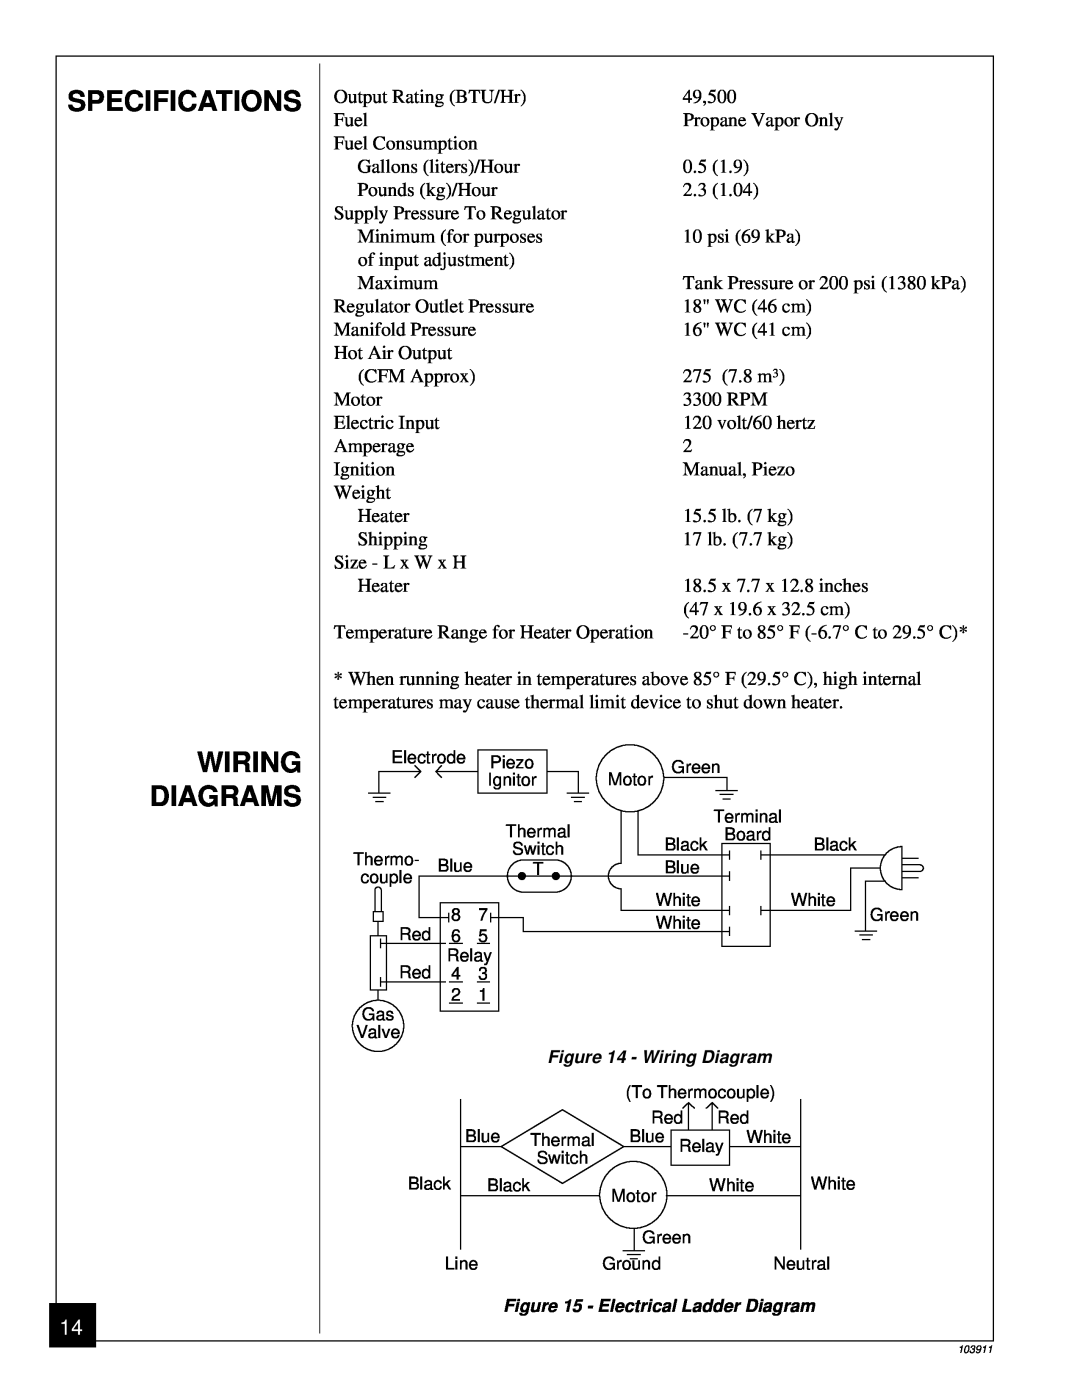 Desa RCLP50B owner manual Specifications Wiring Diagrams 